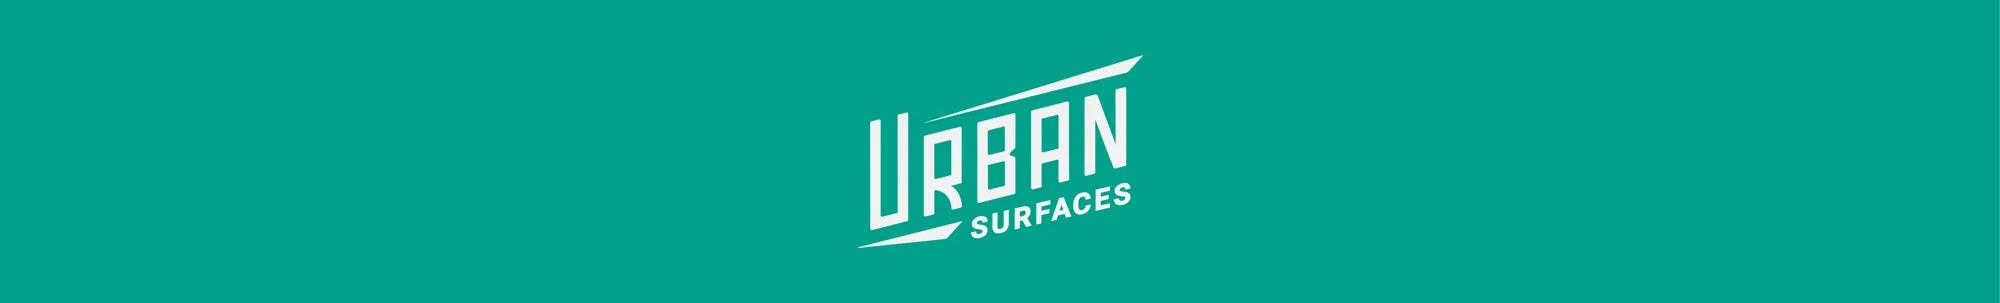 Urban Surfaces logo on teal background